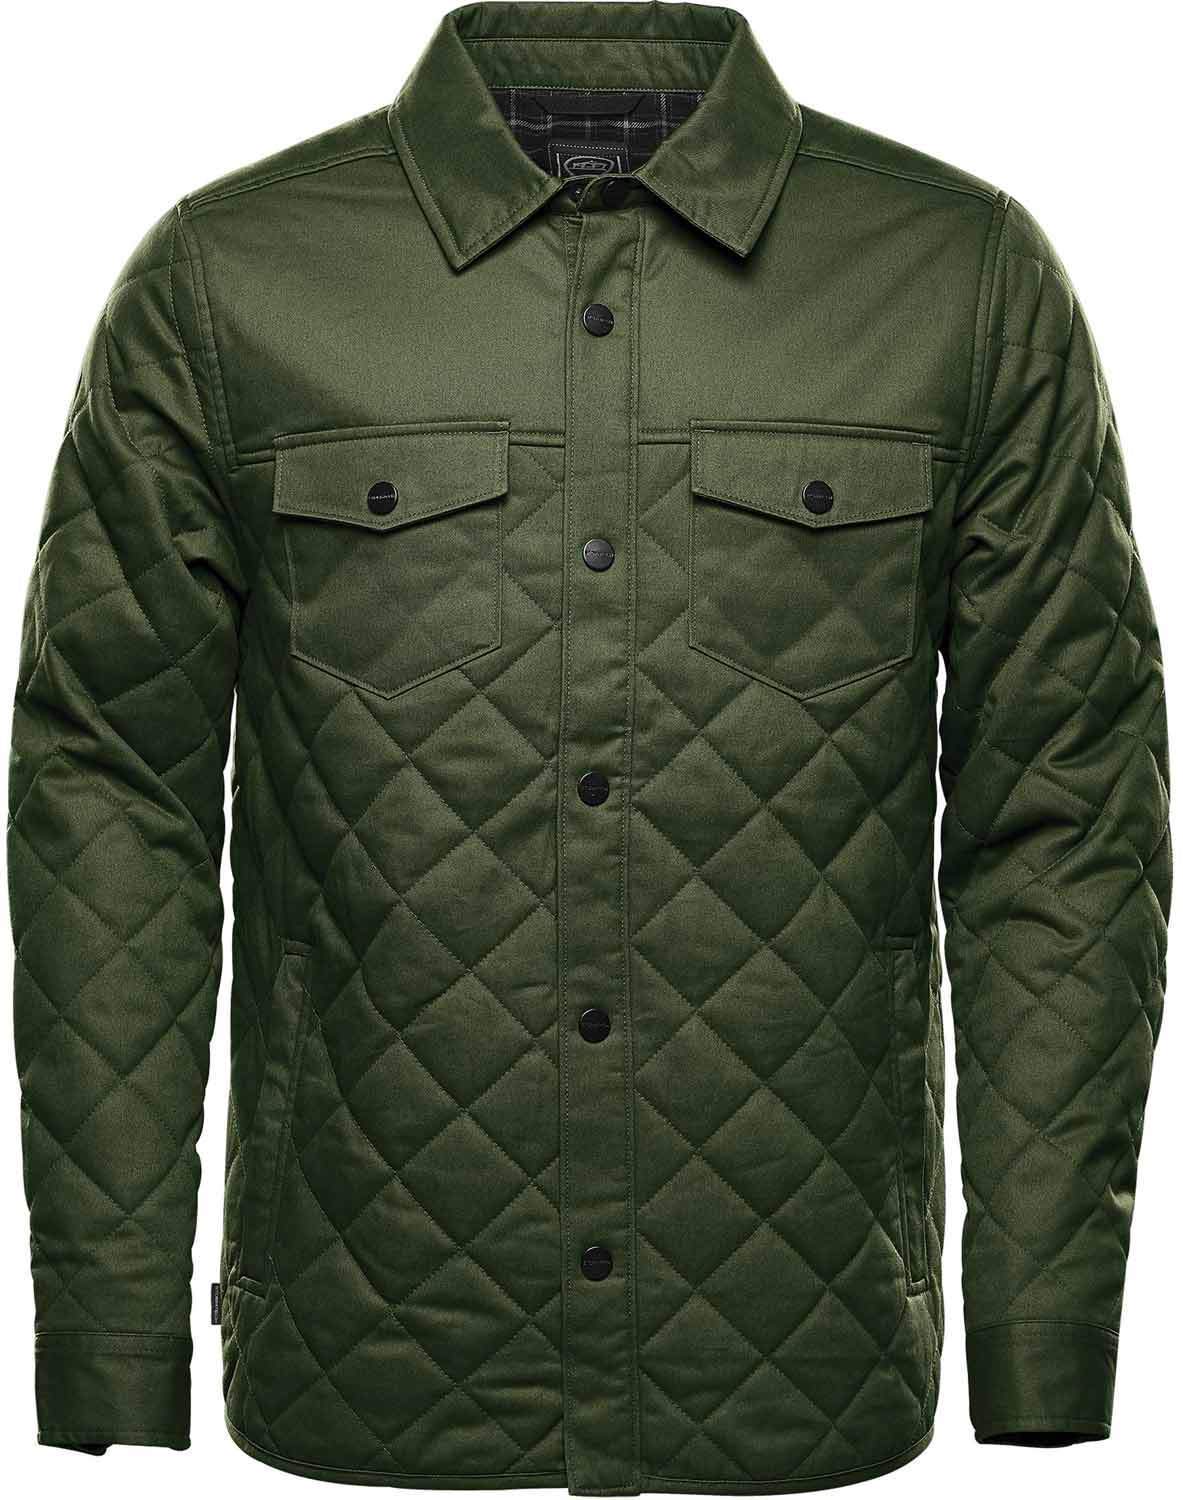 Stormtech Men's Bushwick Quilted Jacket for embroidery or screen print at  Black Fish Clothing